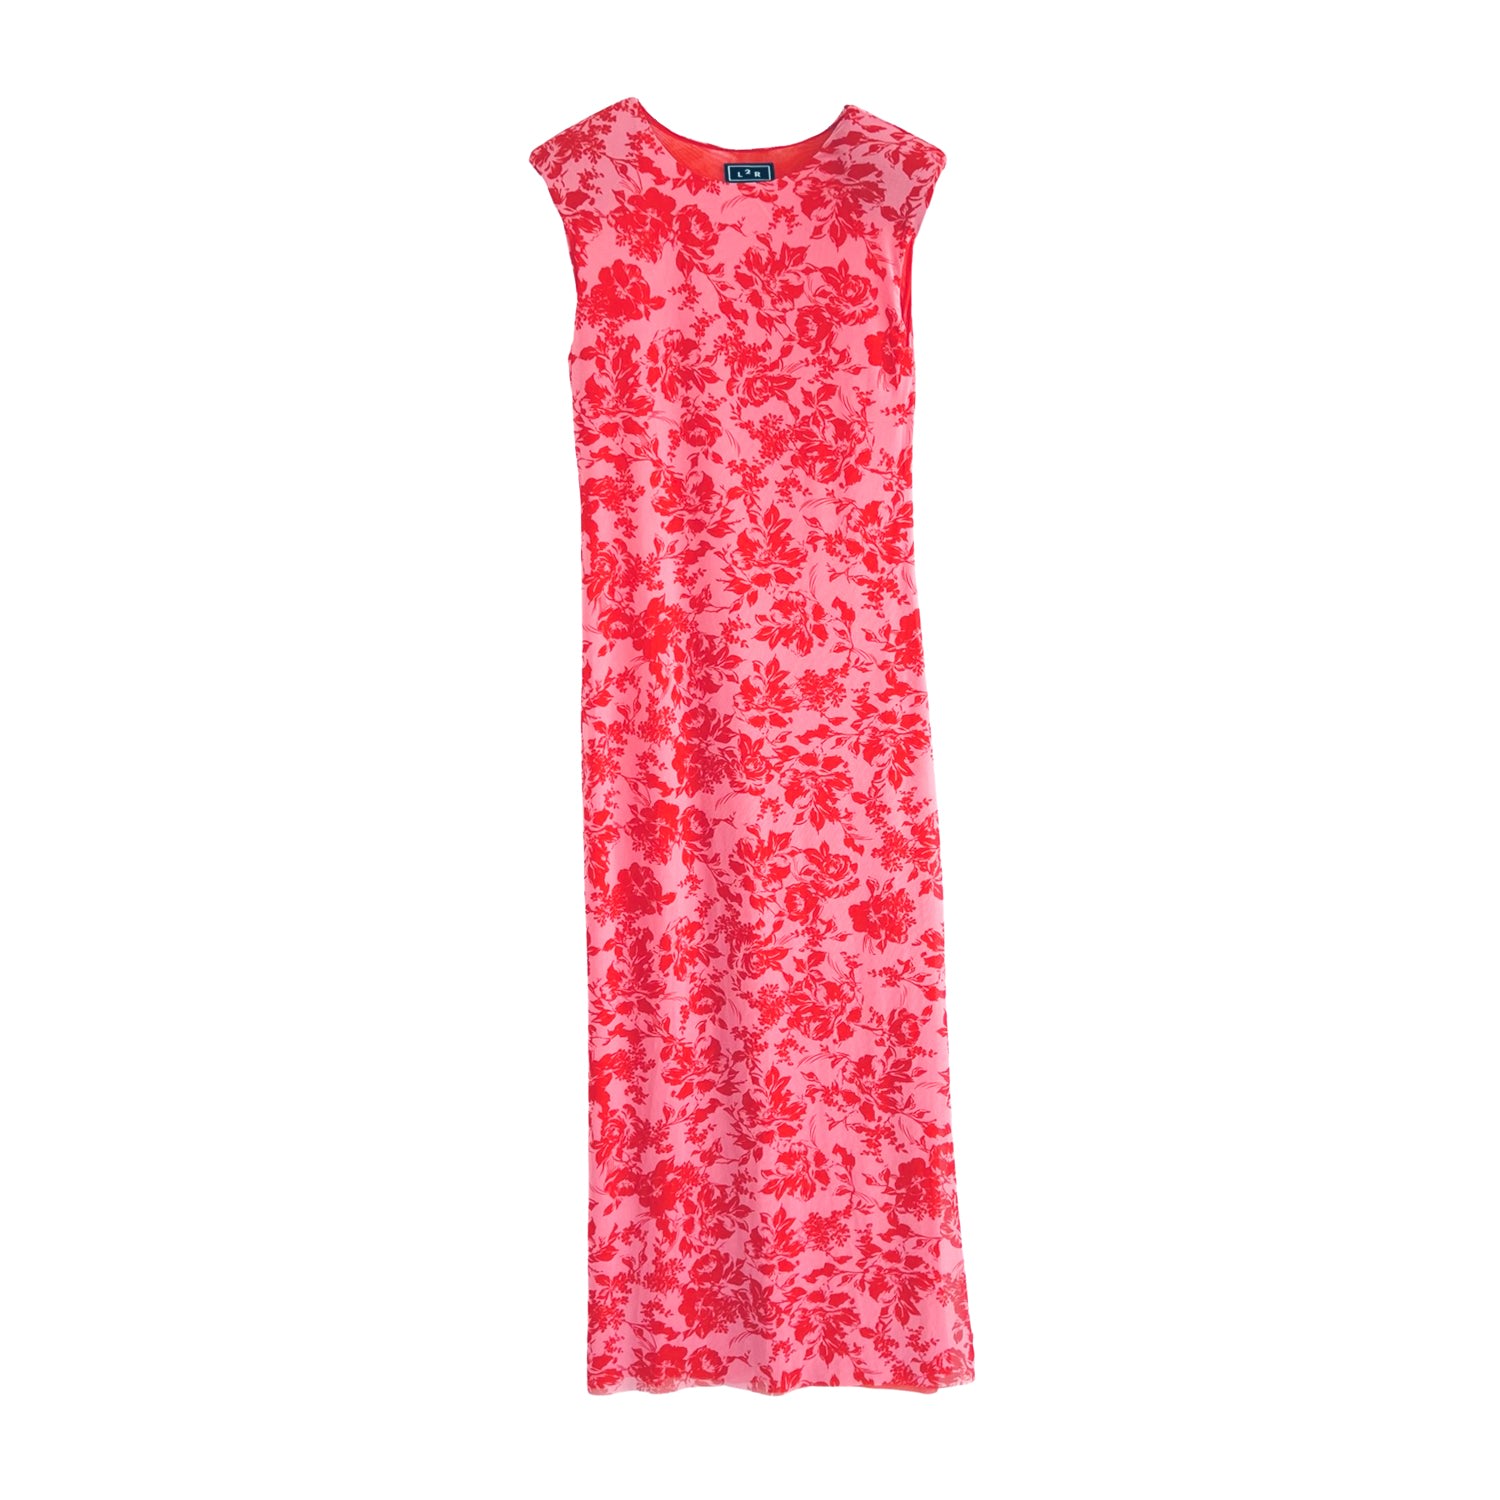 L2r The Label Women's Shoulder Pad Printed Mesh Dress In Red In Pink